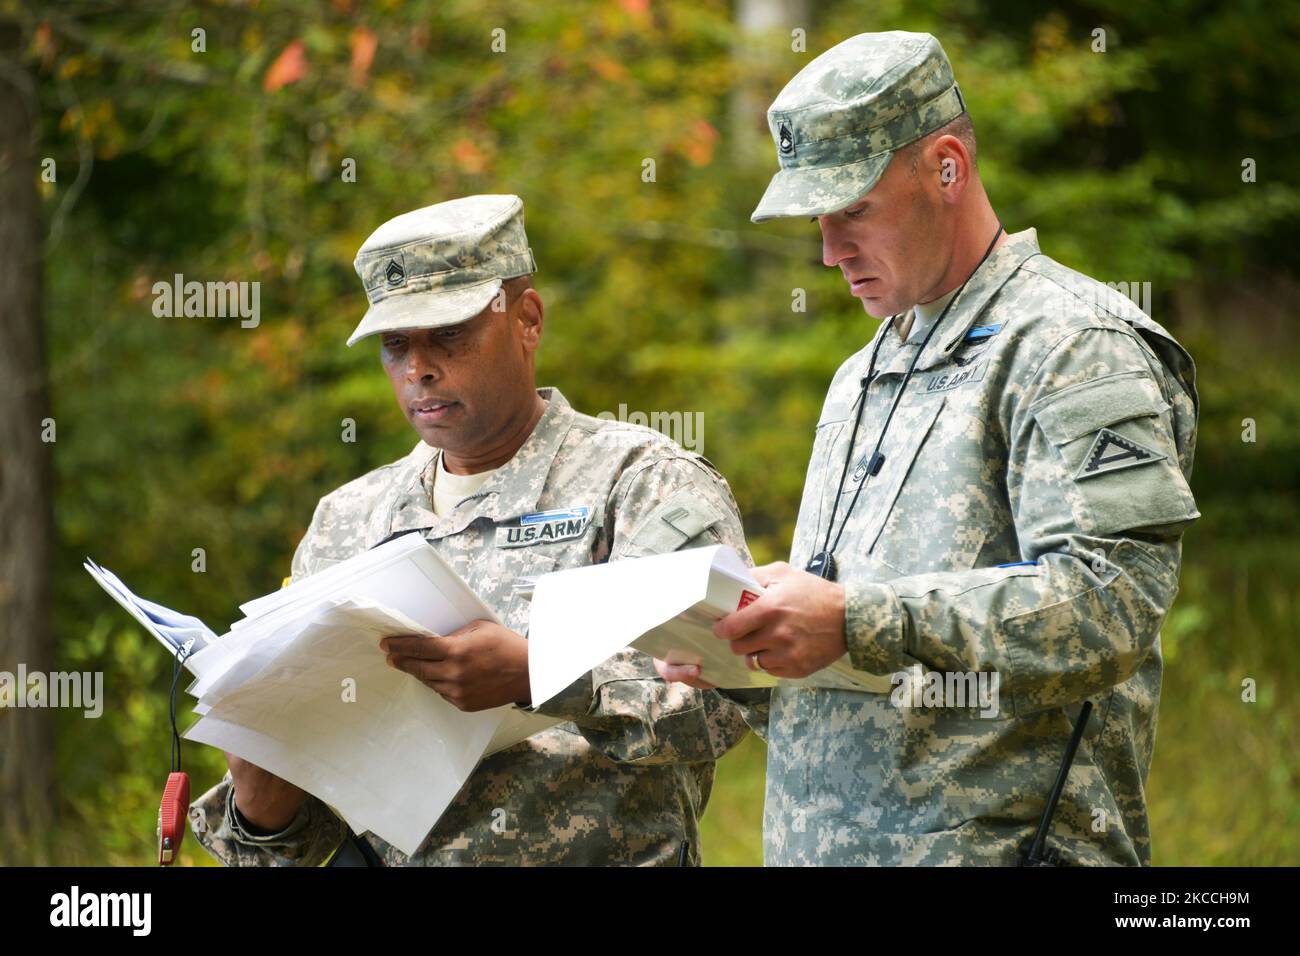 U.S. Army evaluators check a candidate's record during a competition. Stock Photo